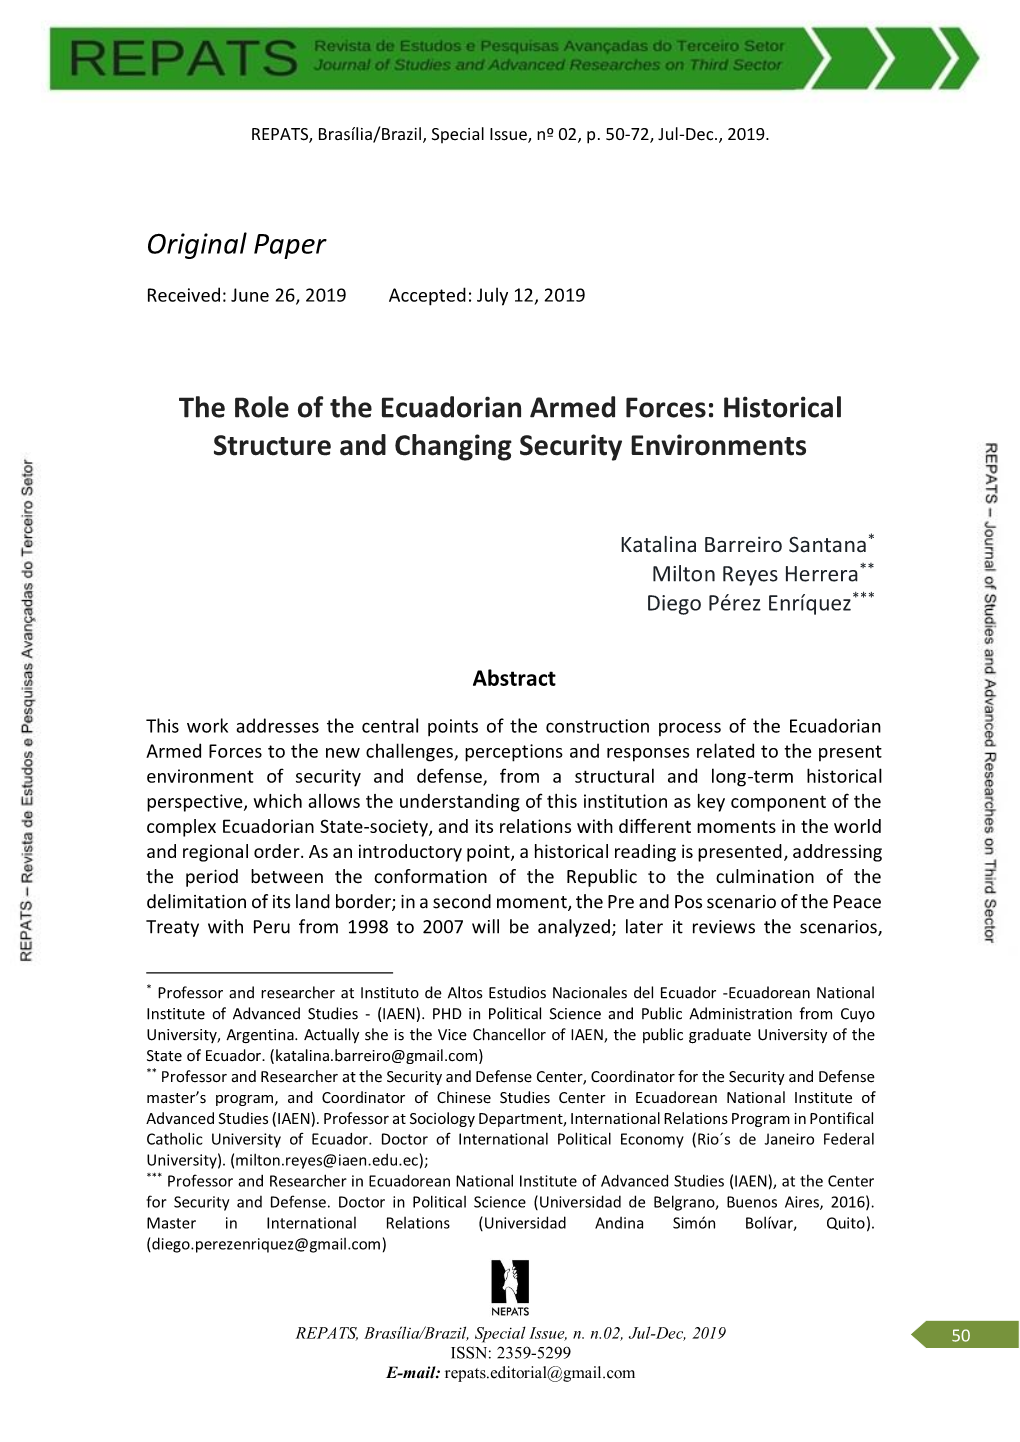 Original Paper the Role of the Ecuadorian Armed Forces